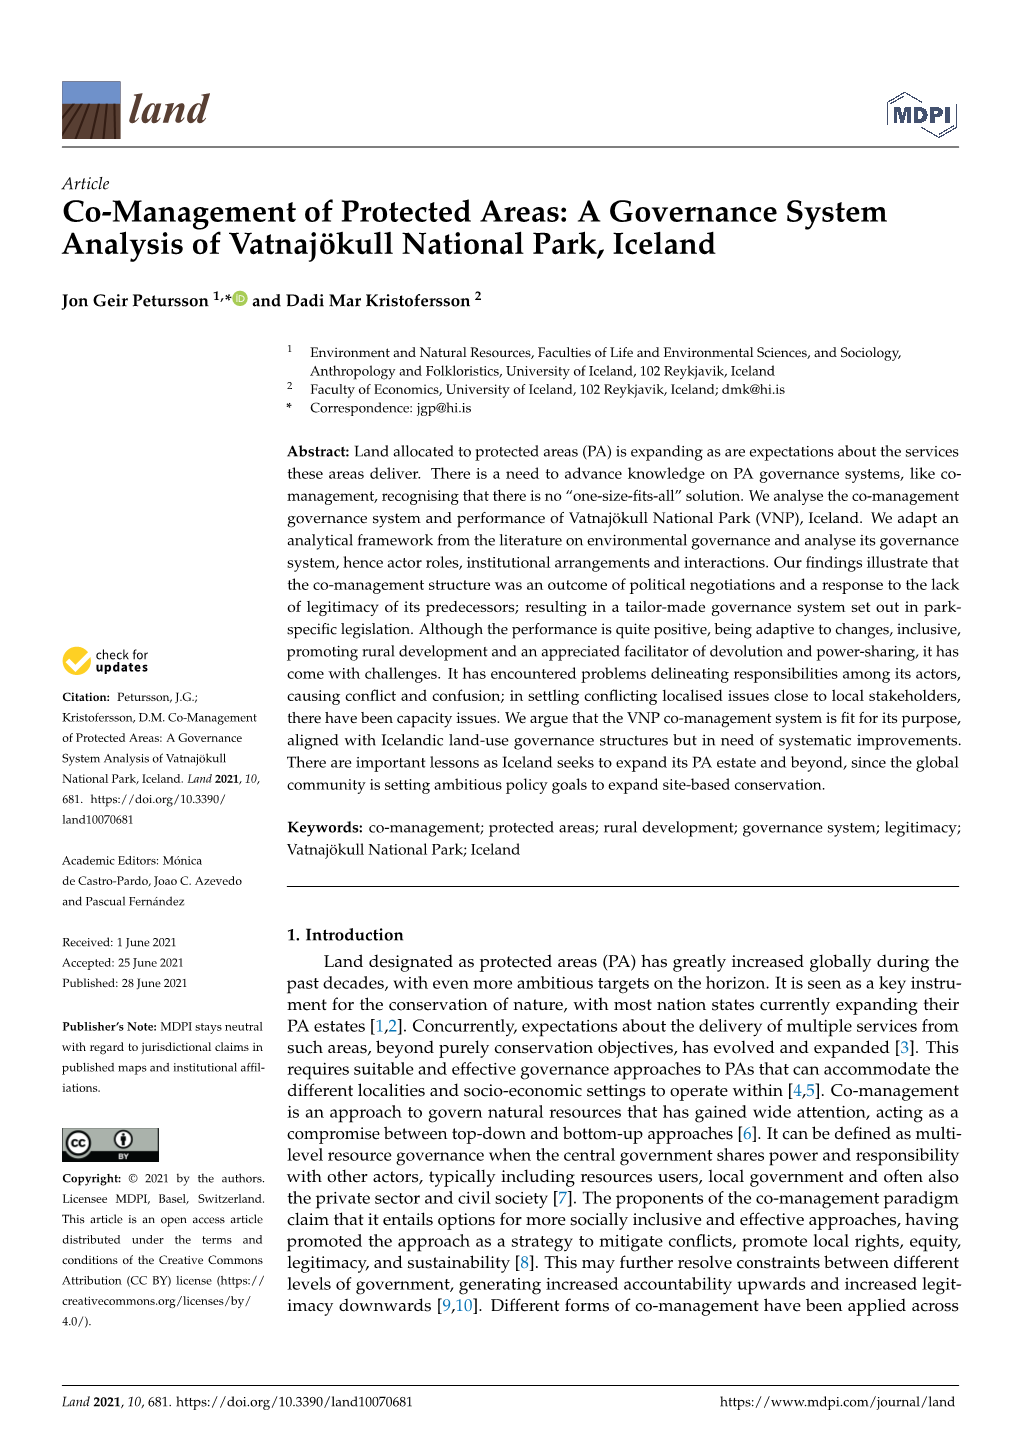 Co-Management of Protected Areas: a Governance System Analysis of Vatnajökull National Park, Iceland